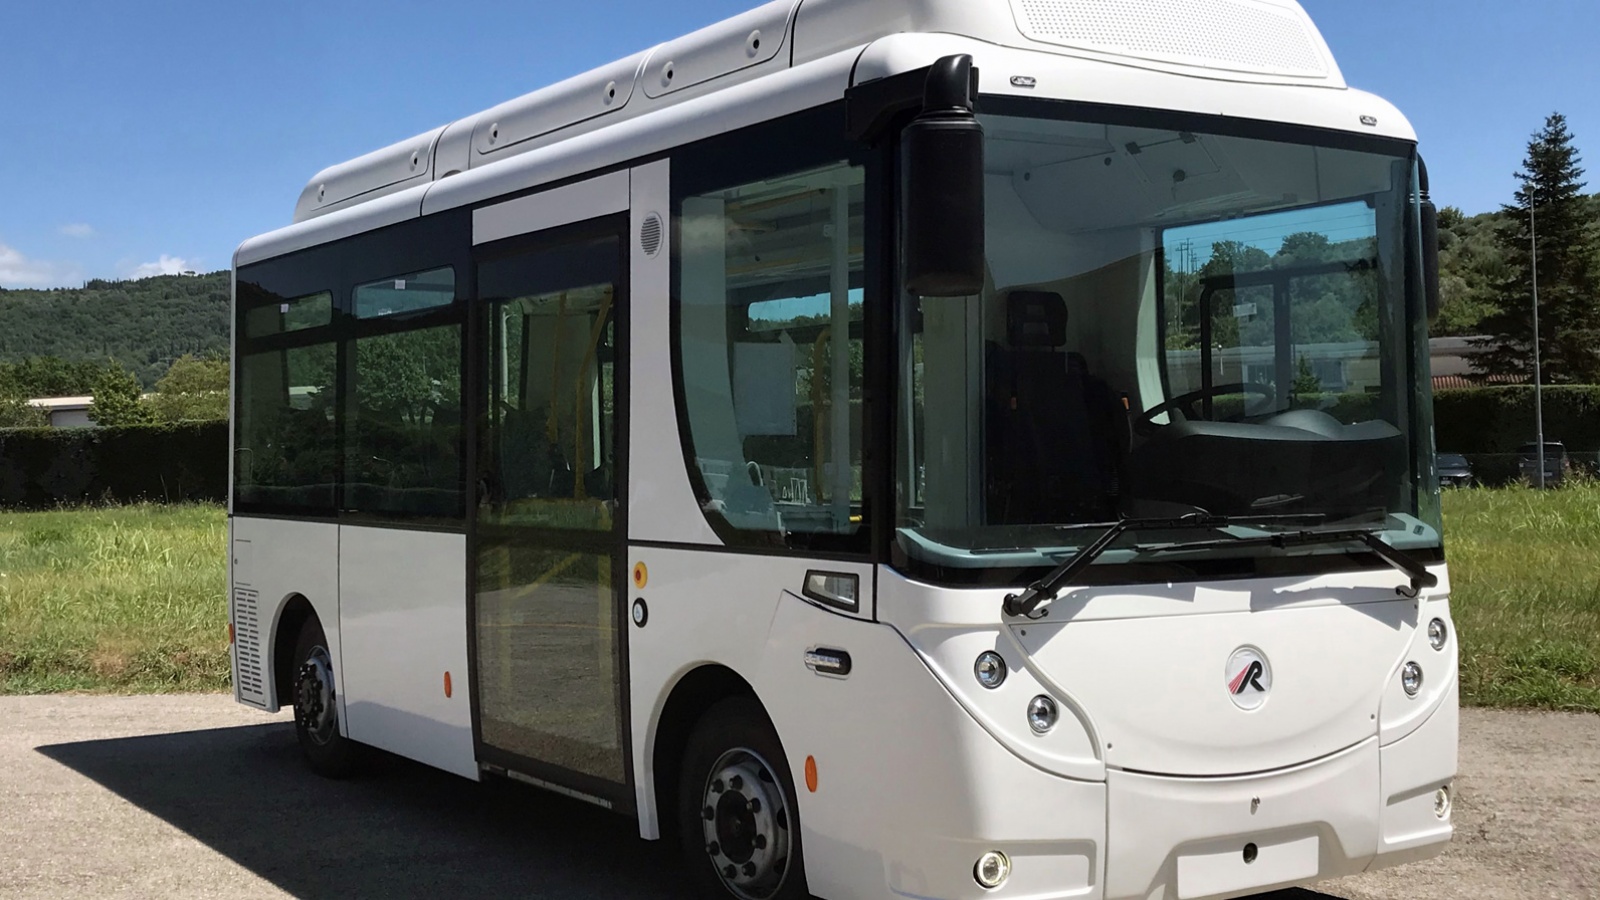 AixenProvence to receive 13 Rampini E60. An order from Keolis